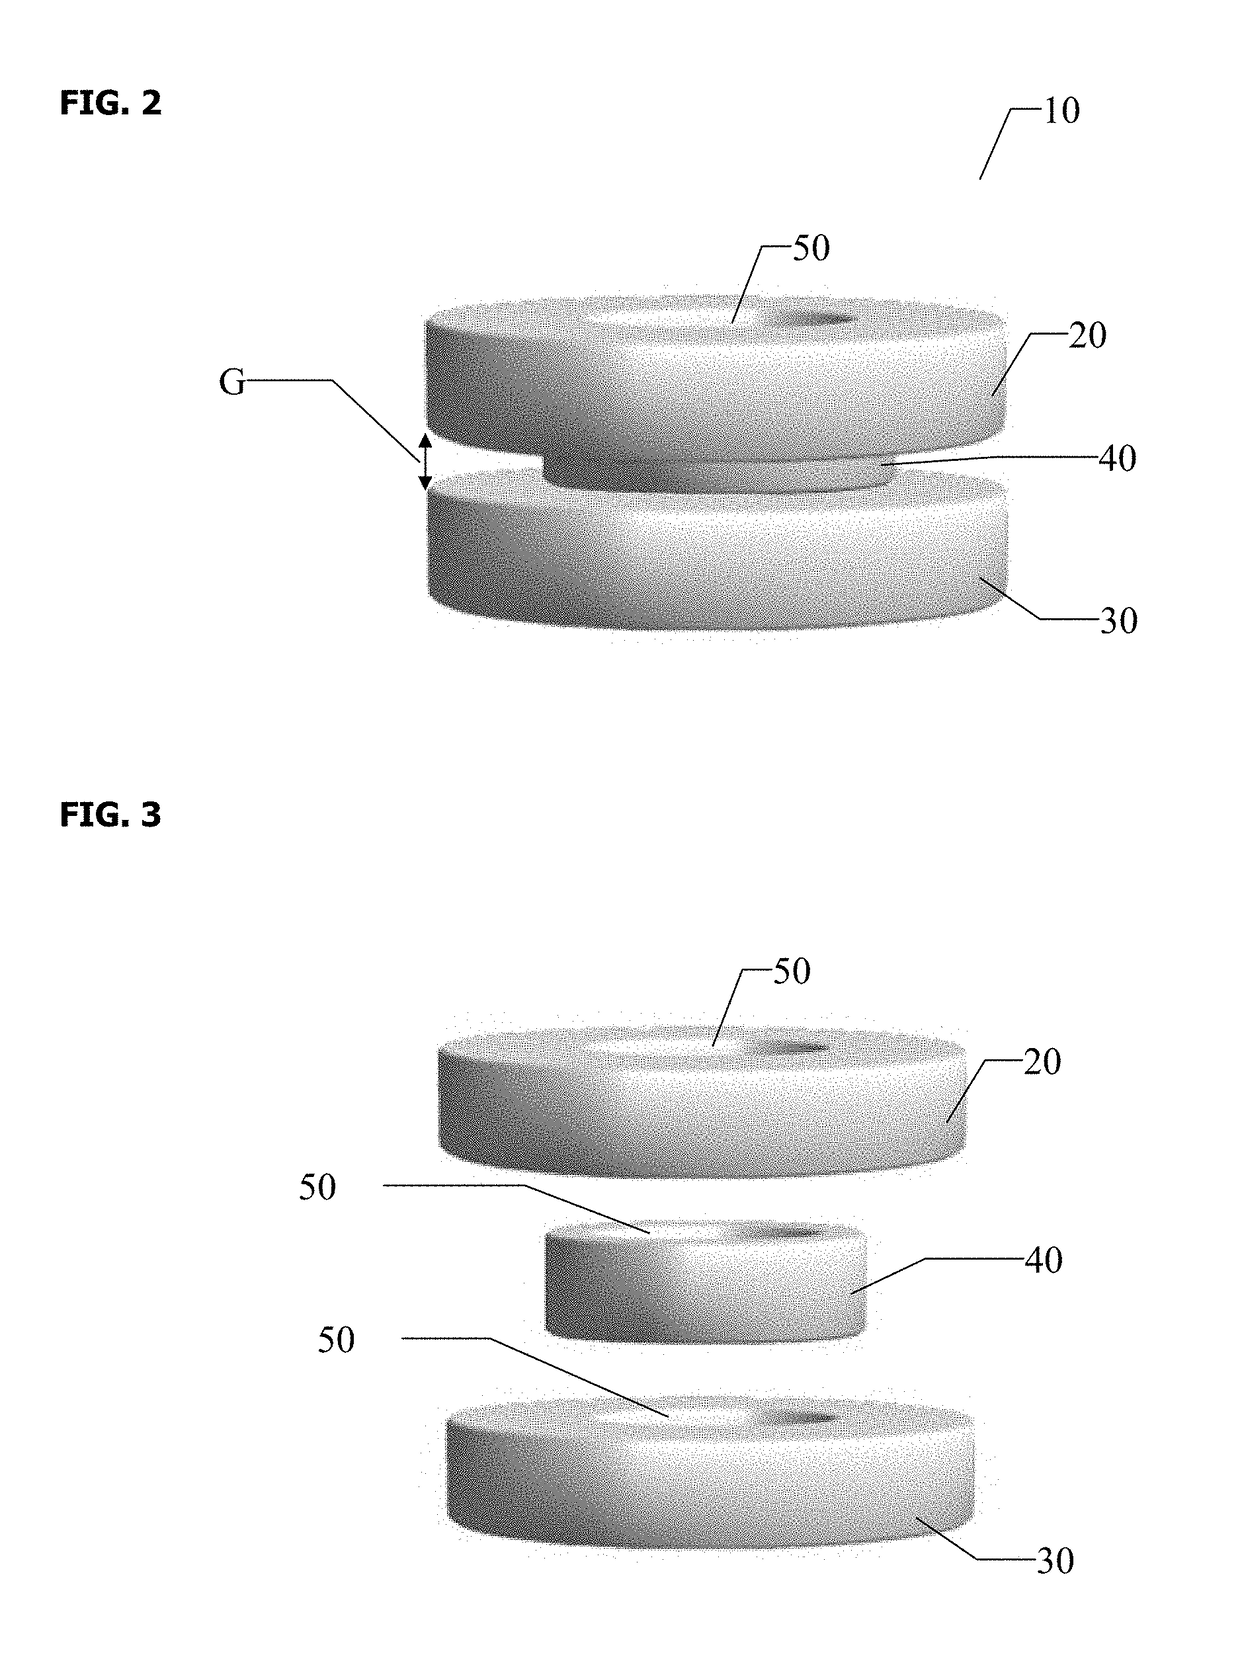 Expandable Compression Rings for Improved Anastomotic Joining of Tissues